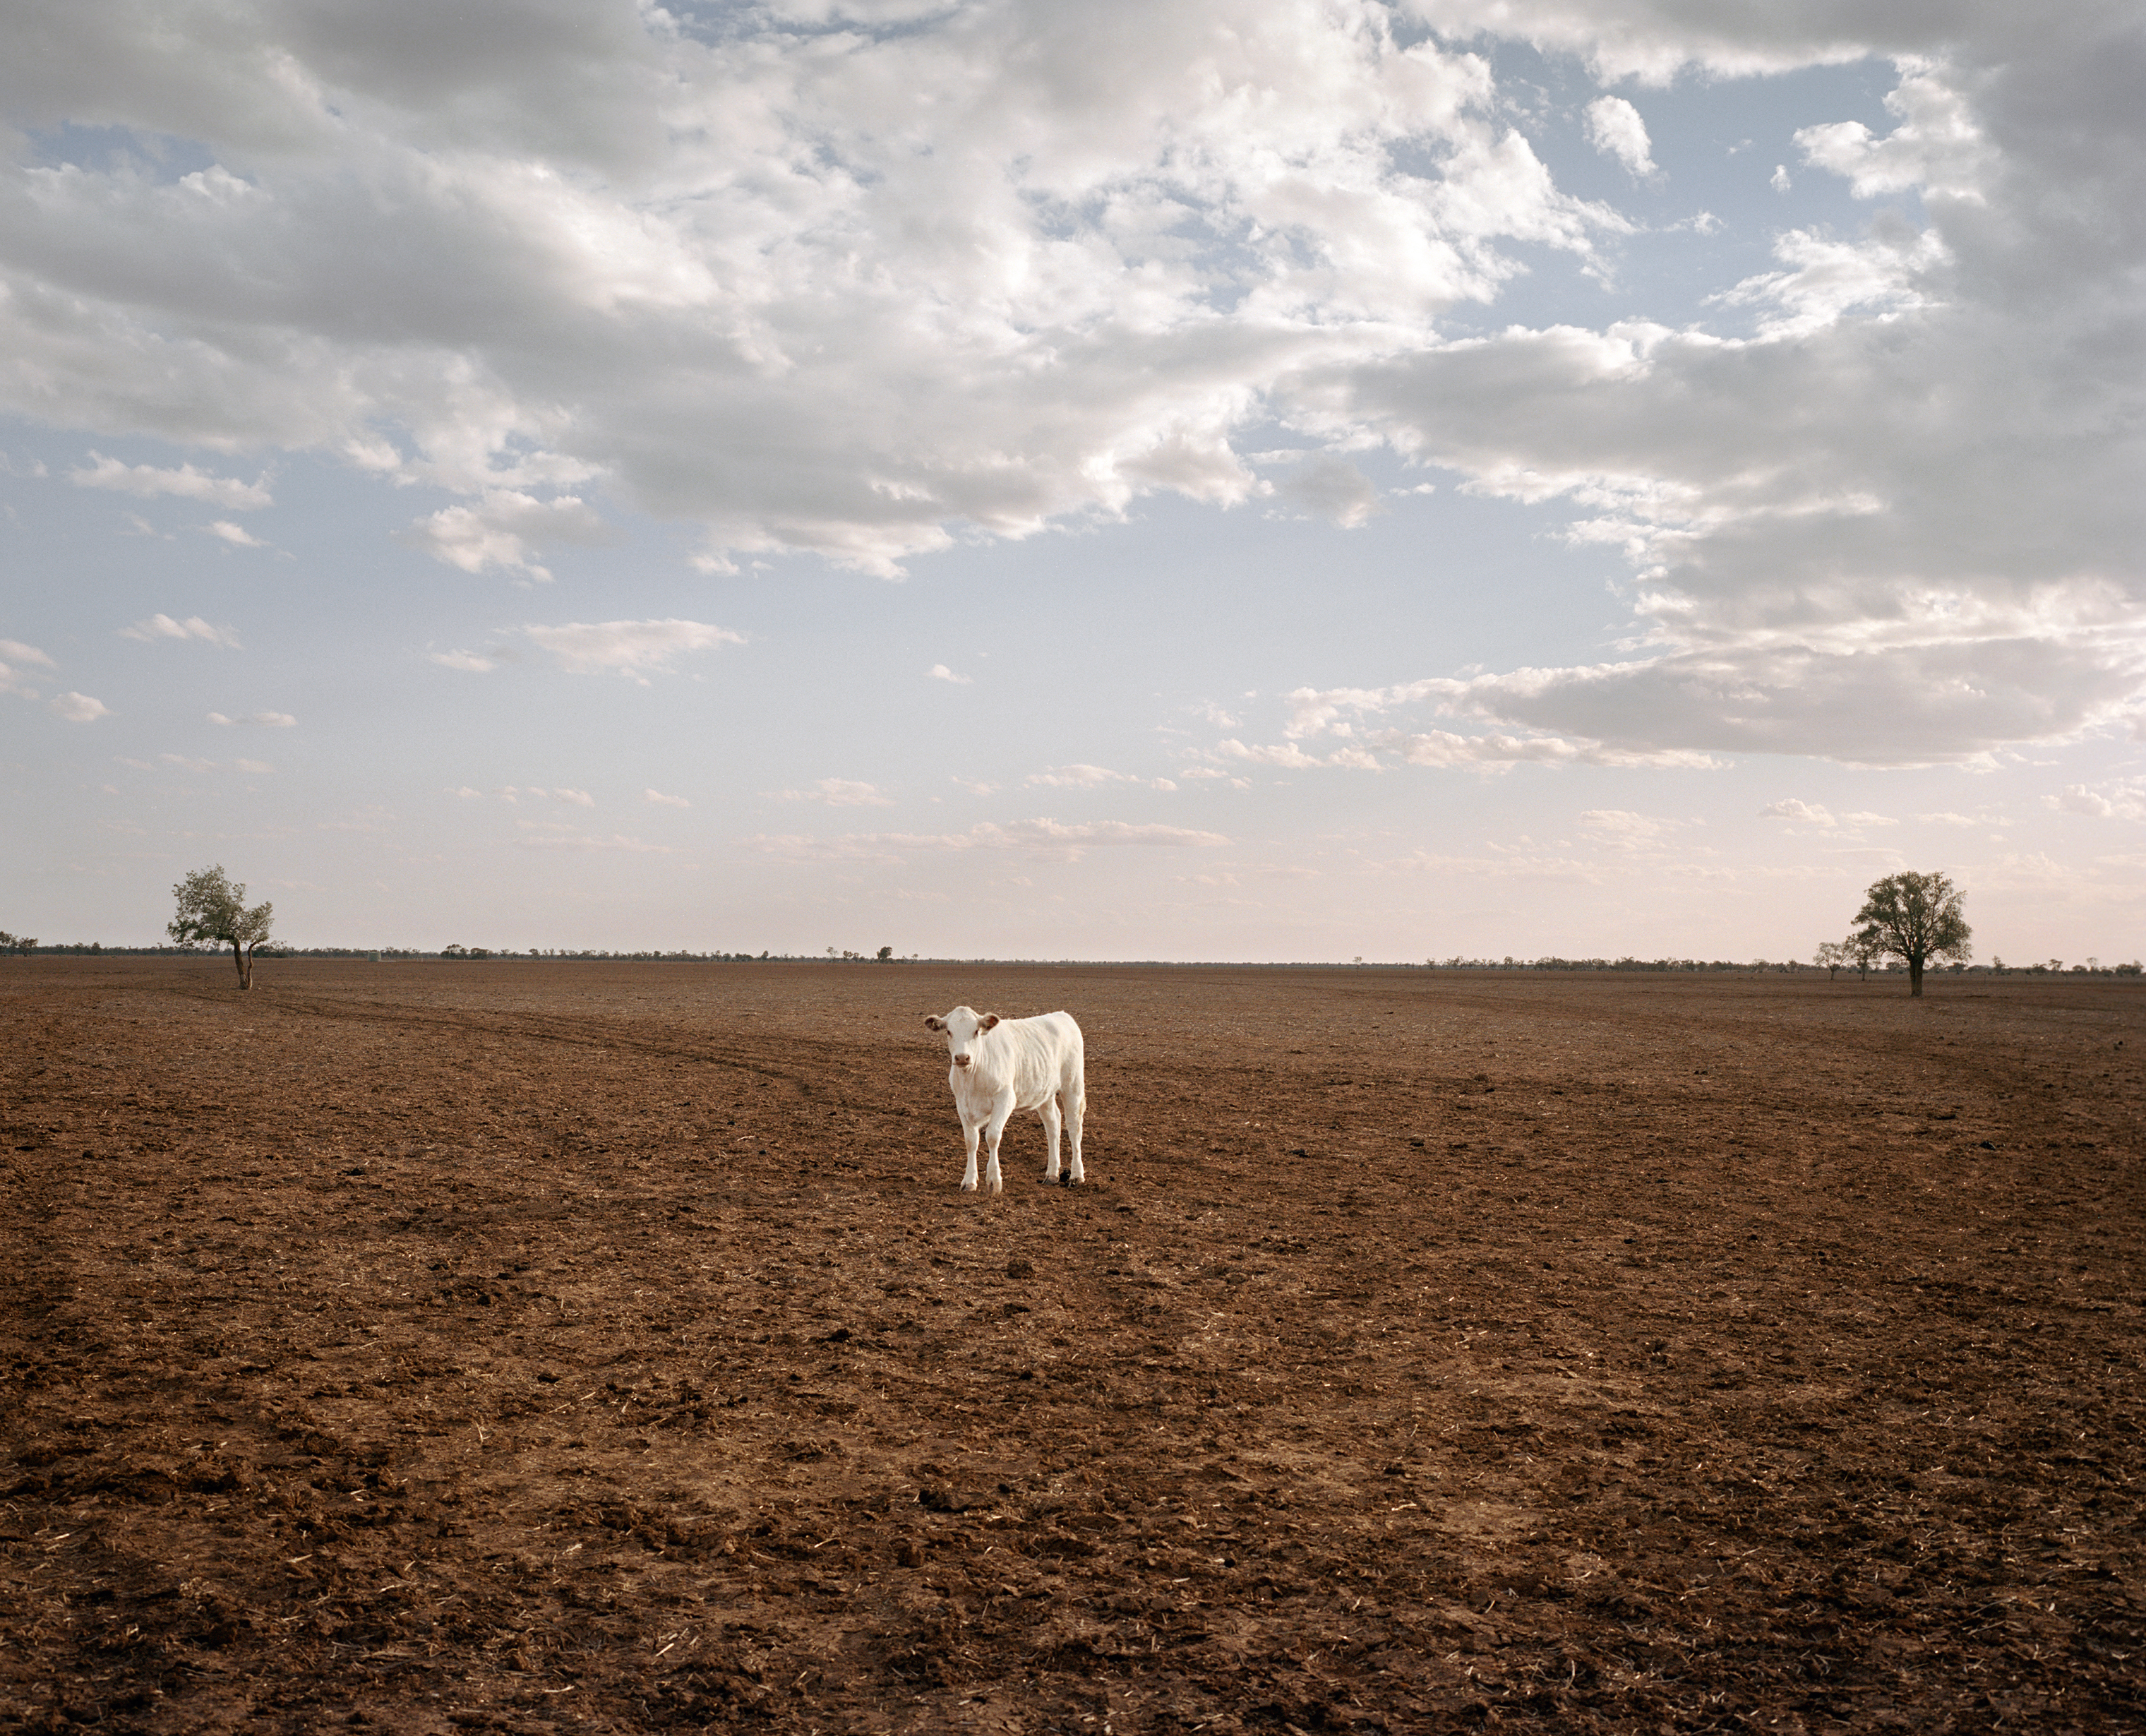 A cow stands in a paddock on Ashantee Property near Walgett in New South Wales in November. Ashantee is owned by farmer Ed Colless, who has only planted one crop in six years because of the drought. "If we miss 2019," he says, "it will be tough." (Adam Ferguson for TIME)